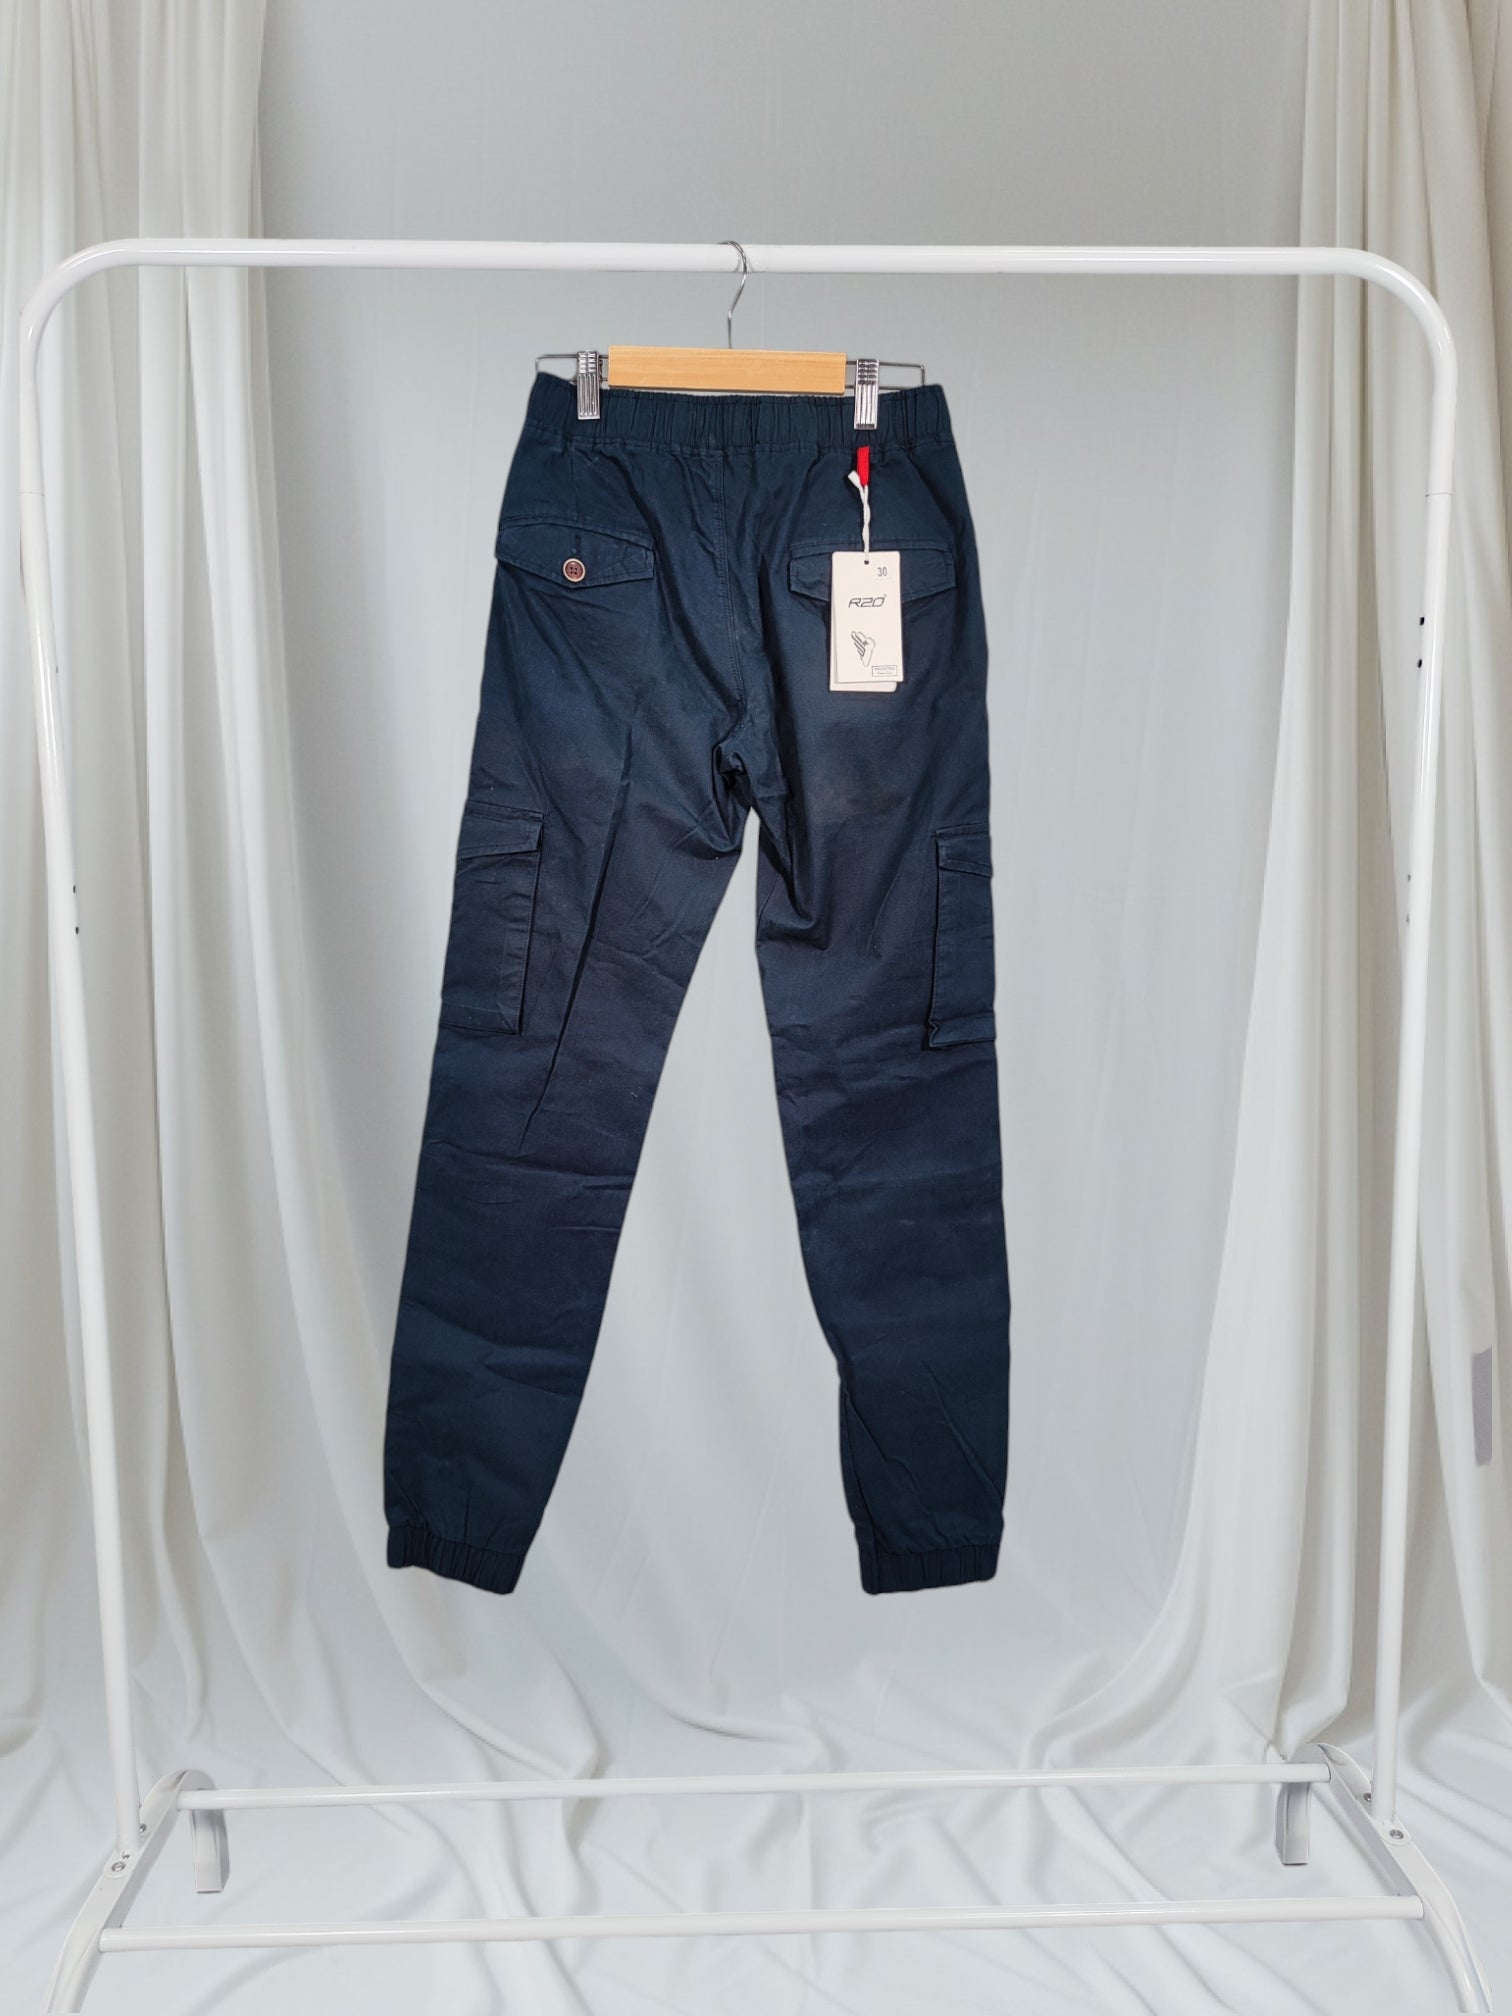 R20 Mens Navy Cargo Pant, Jogger Pant With Bottom Cuff, 6 Pocket